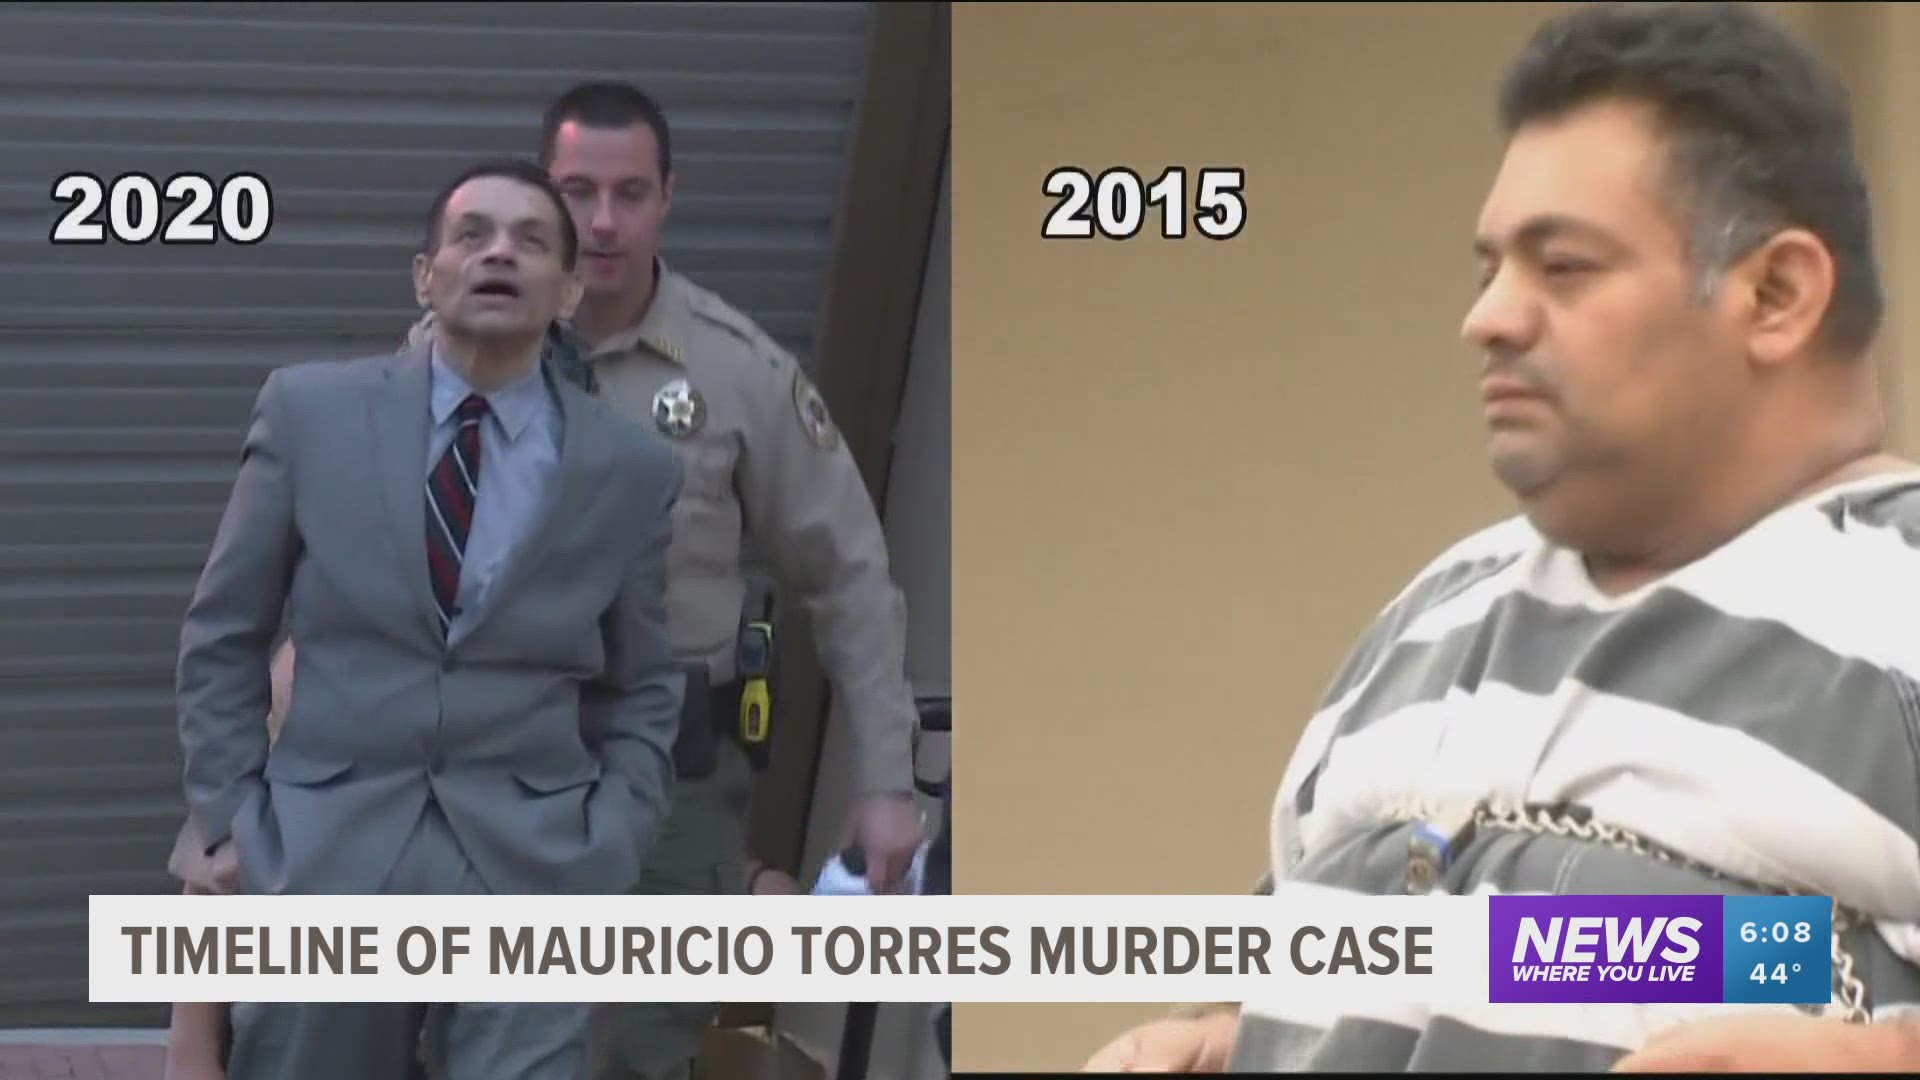 The Arkansas Supreme Court met to determine if it will uphold the murder conviction of Mauricio Torres or retry the case for a third time. https://bit.ly/3iV4N3K